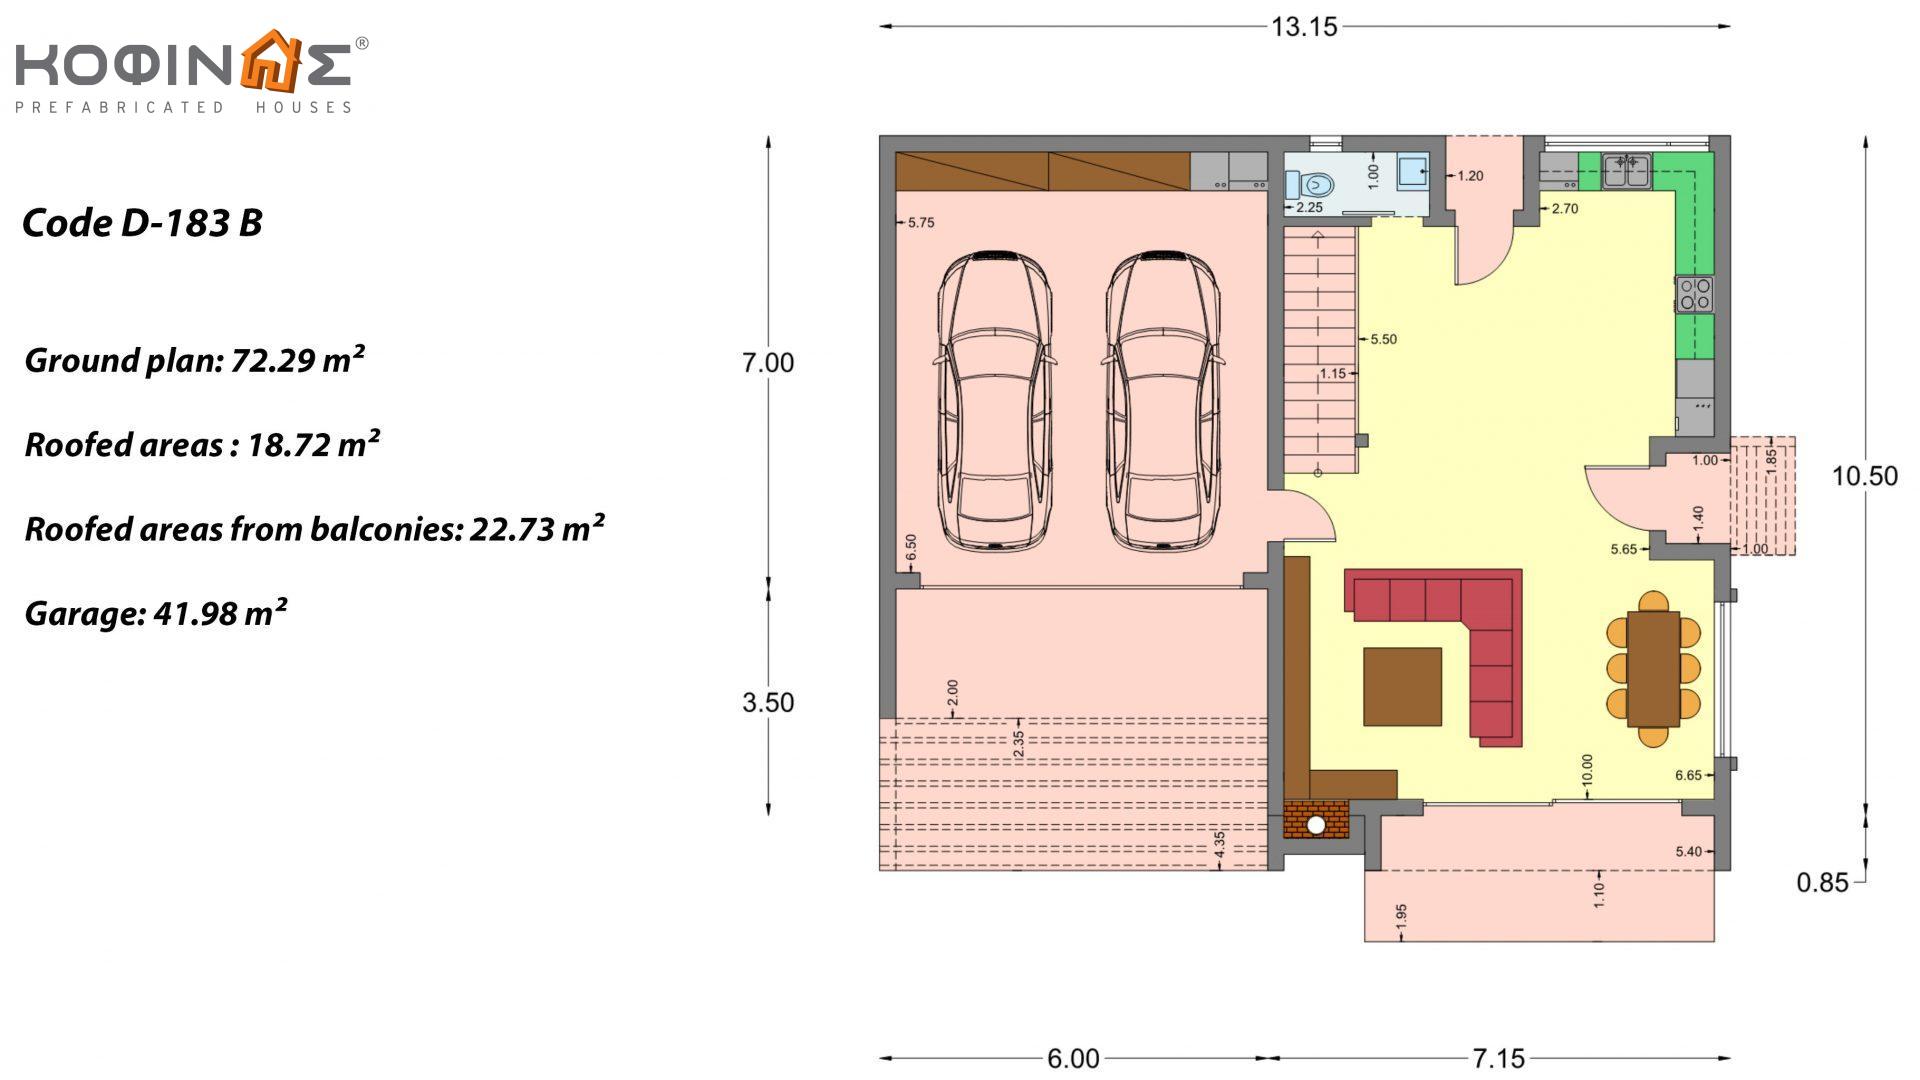 2-story house D 183B, total area 183.77 m²., +garage 41.98 m²(= 225,75 m²), covered areas 59.80 m², and balconies 28.09 m²